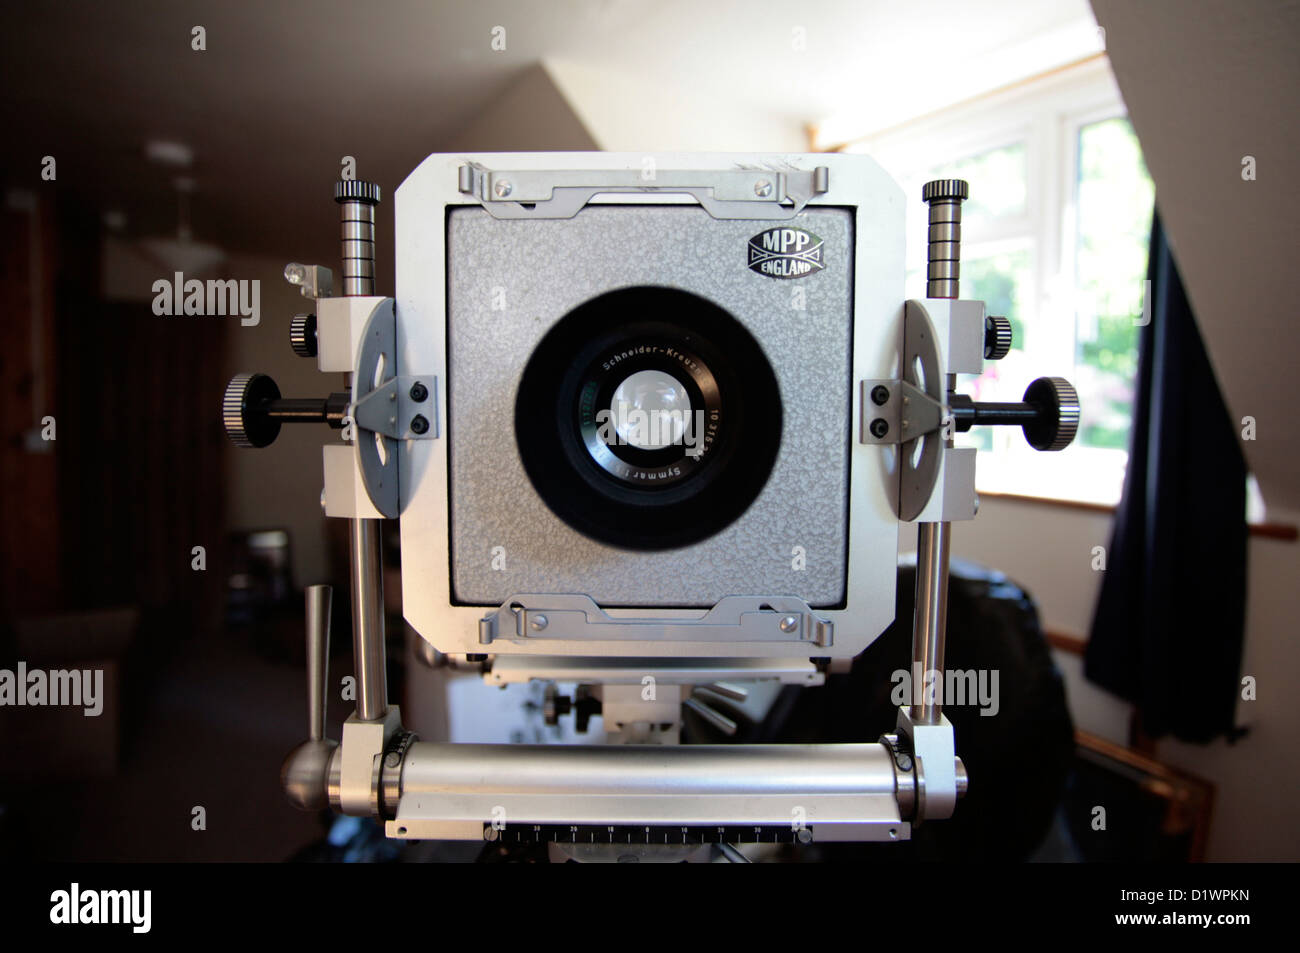 A large format film camera on a wooden tripod. Stock Photo